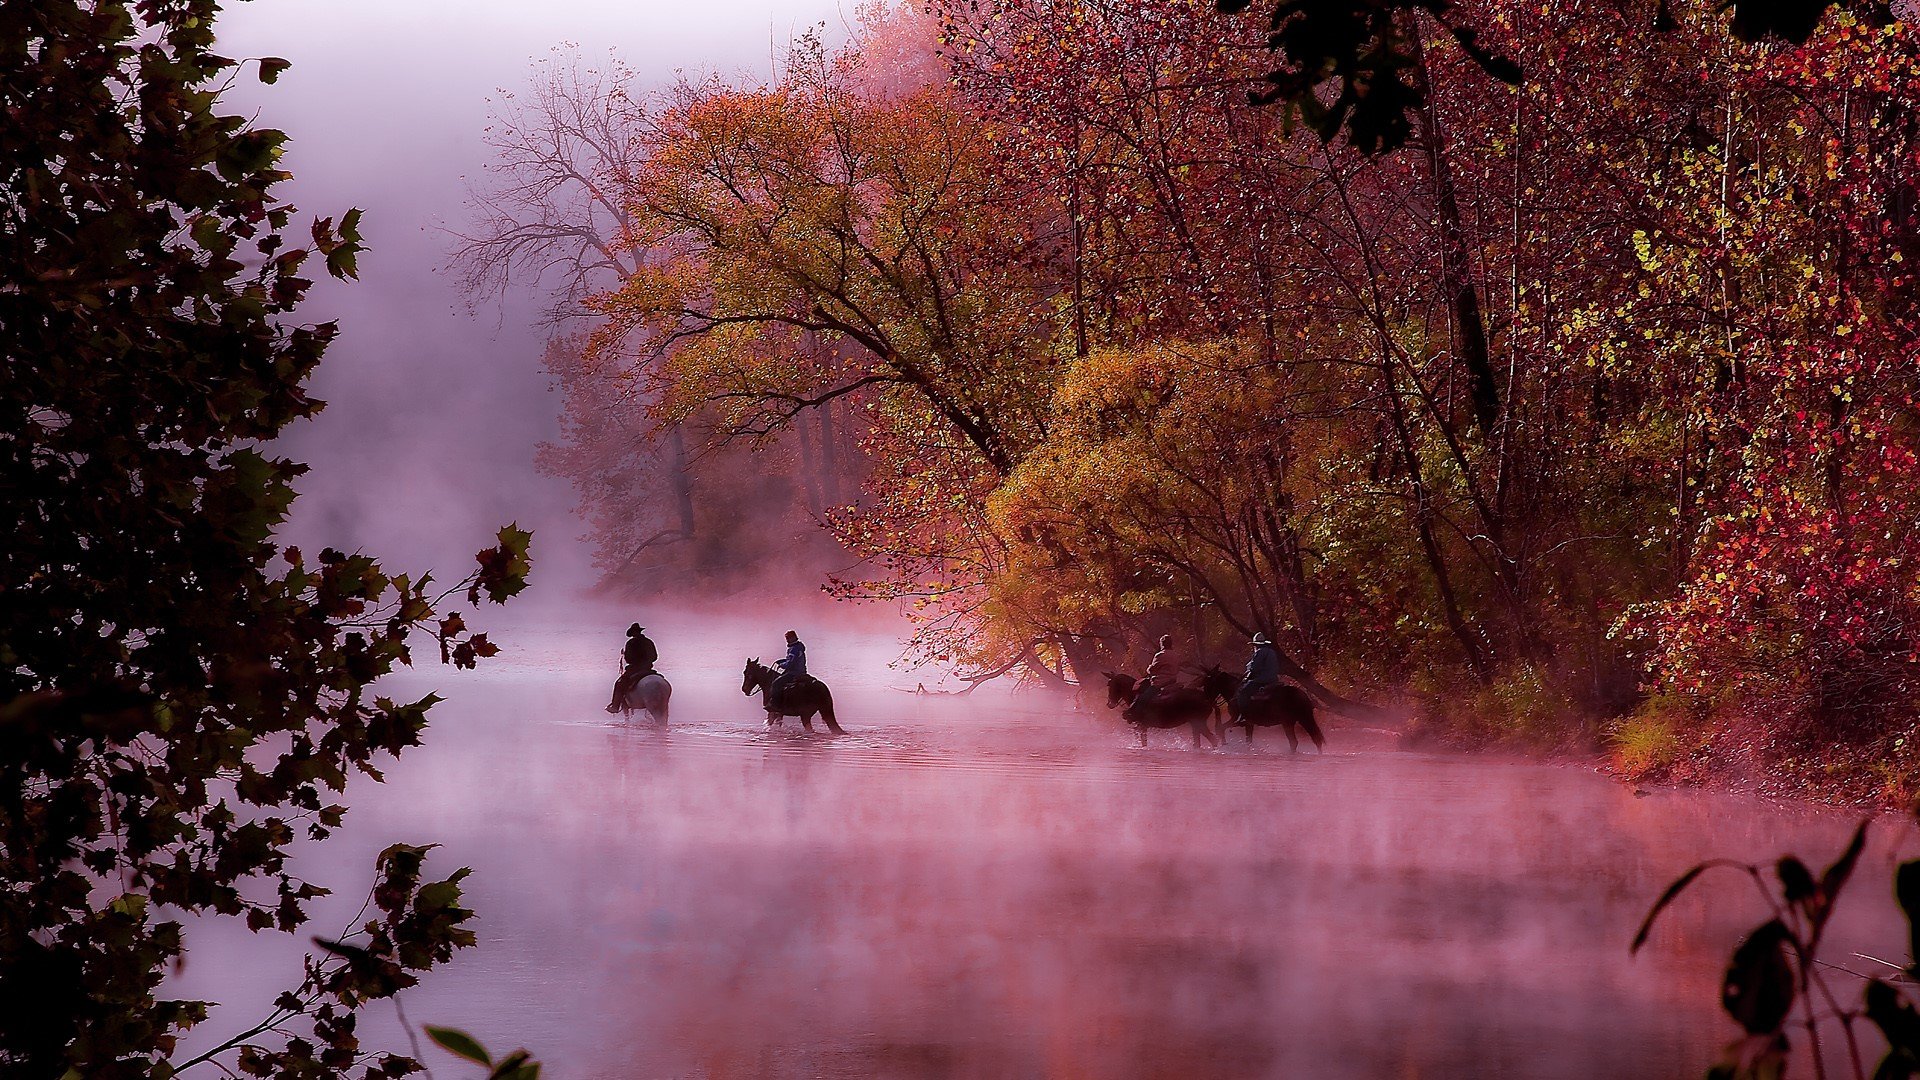 Horses and riders crossing the river on a foggy morning in the 1920x1080